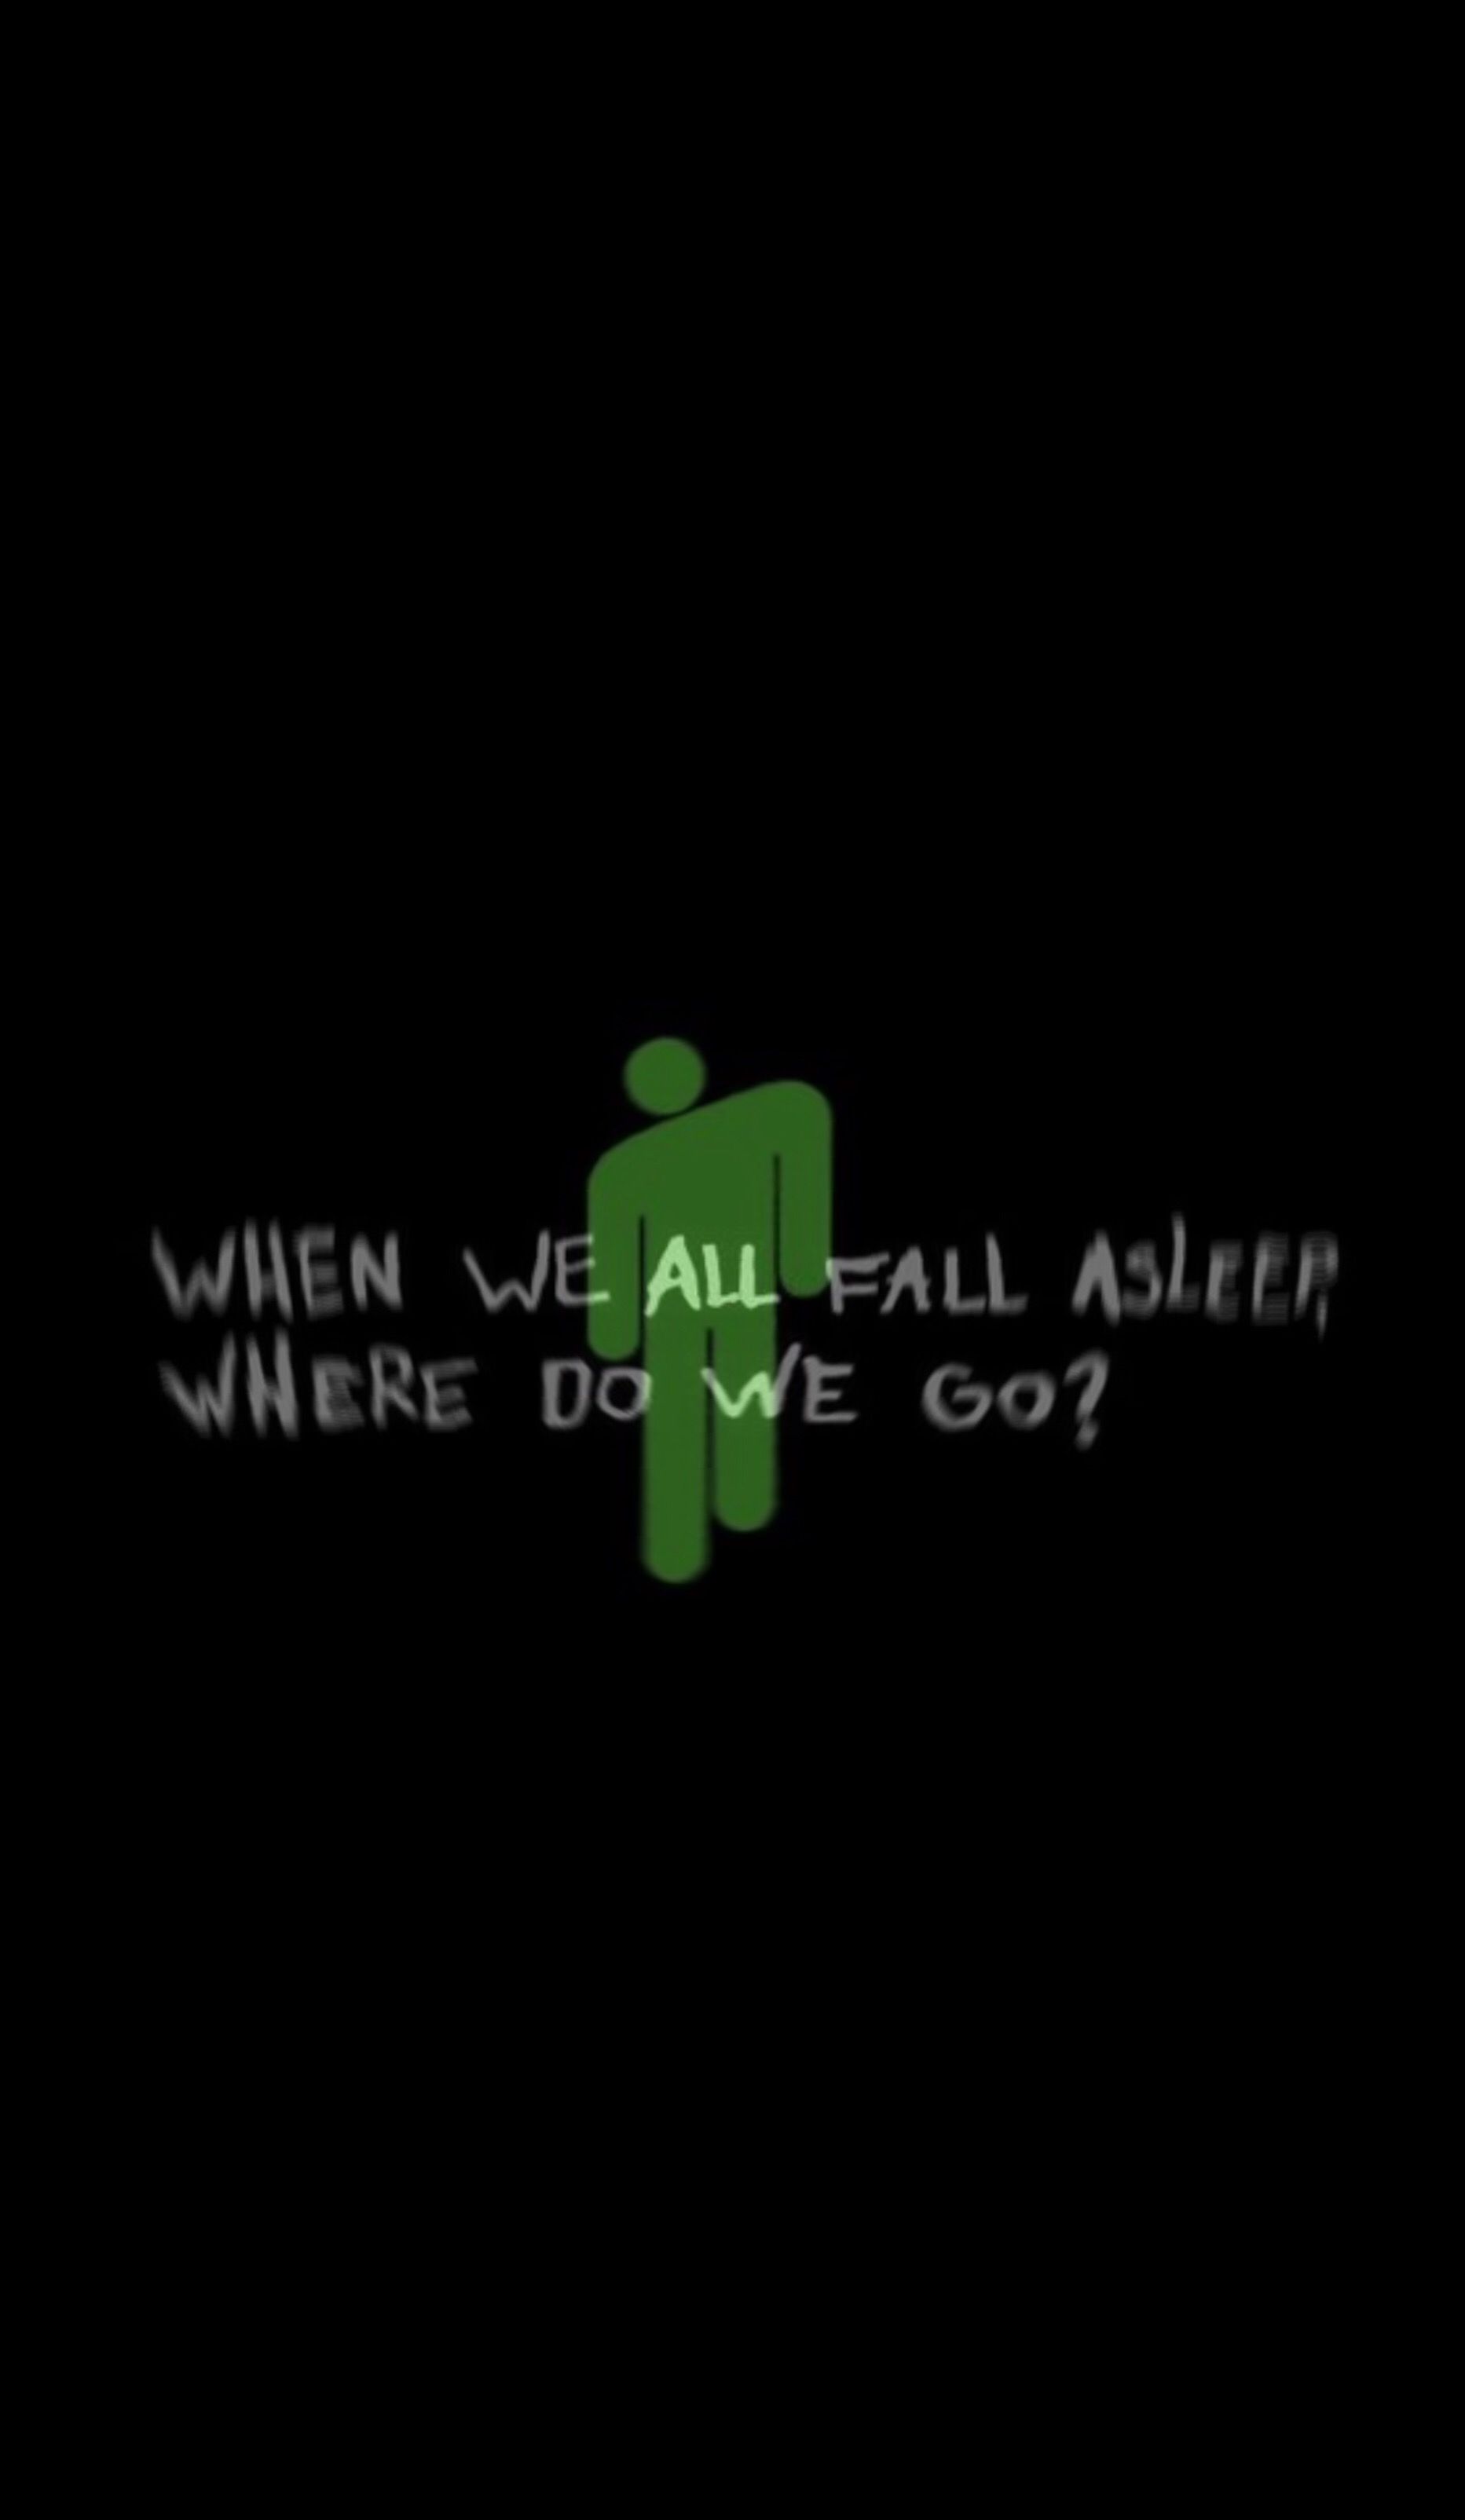 When We All Fall Asleep, Where Do We Go Album Cover Hd Wallpapers